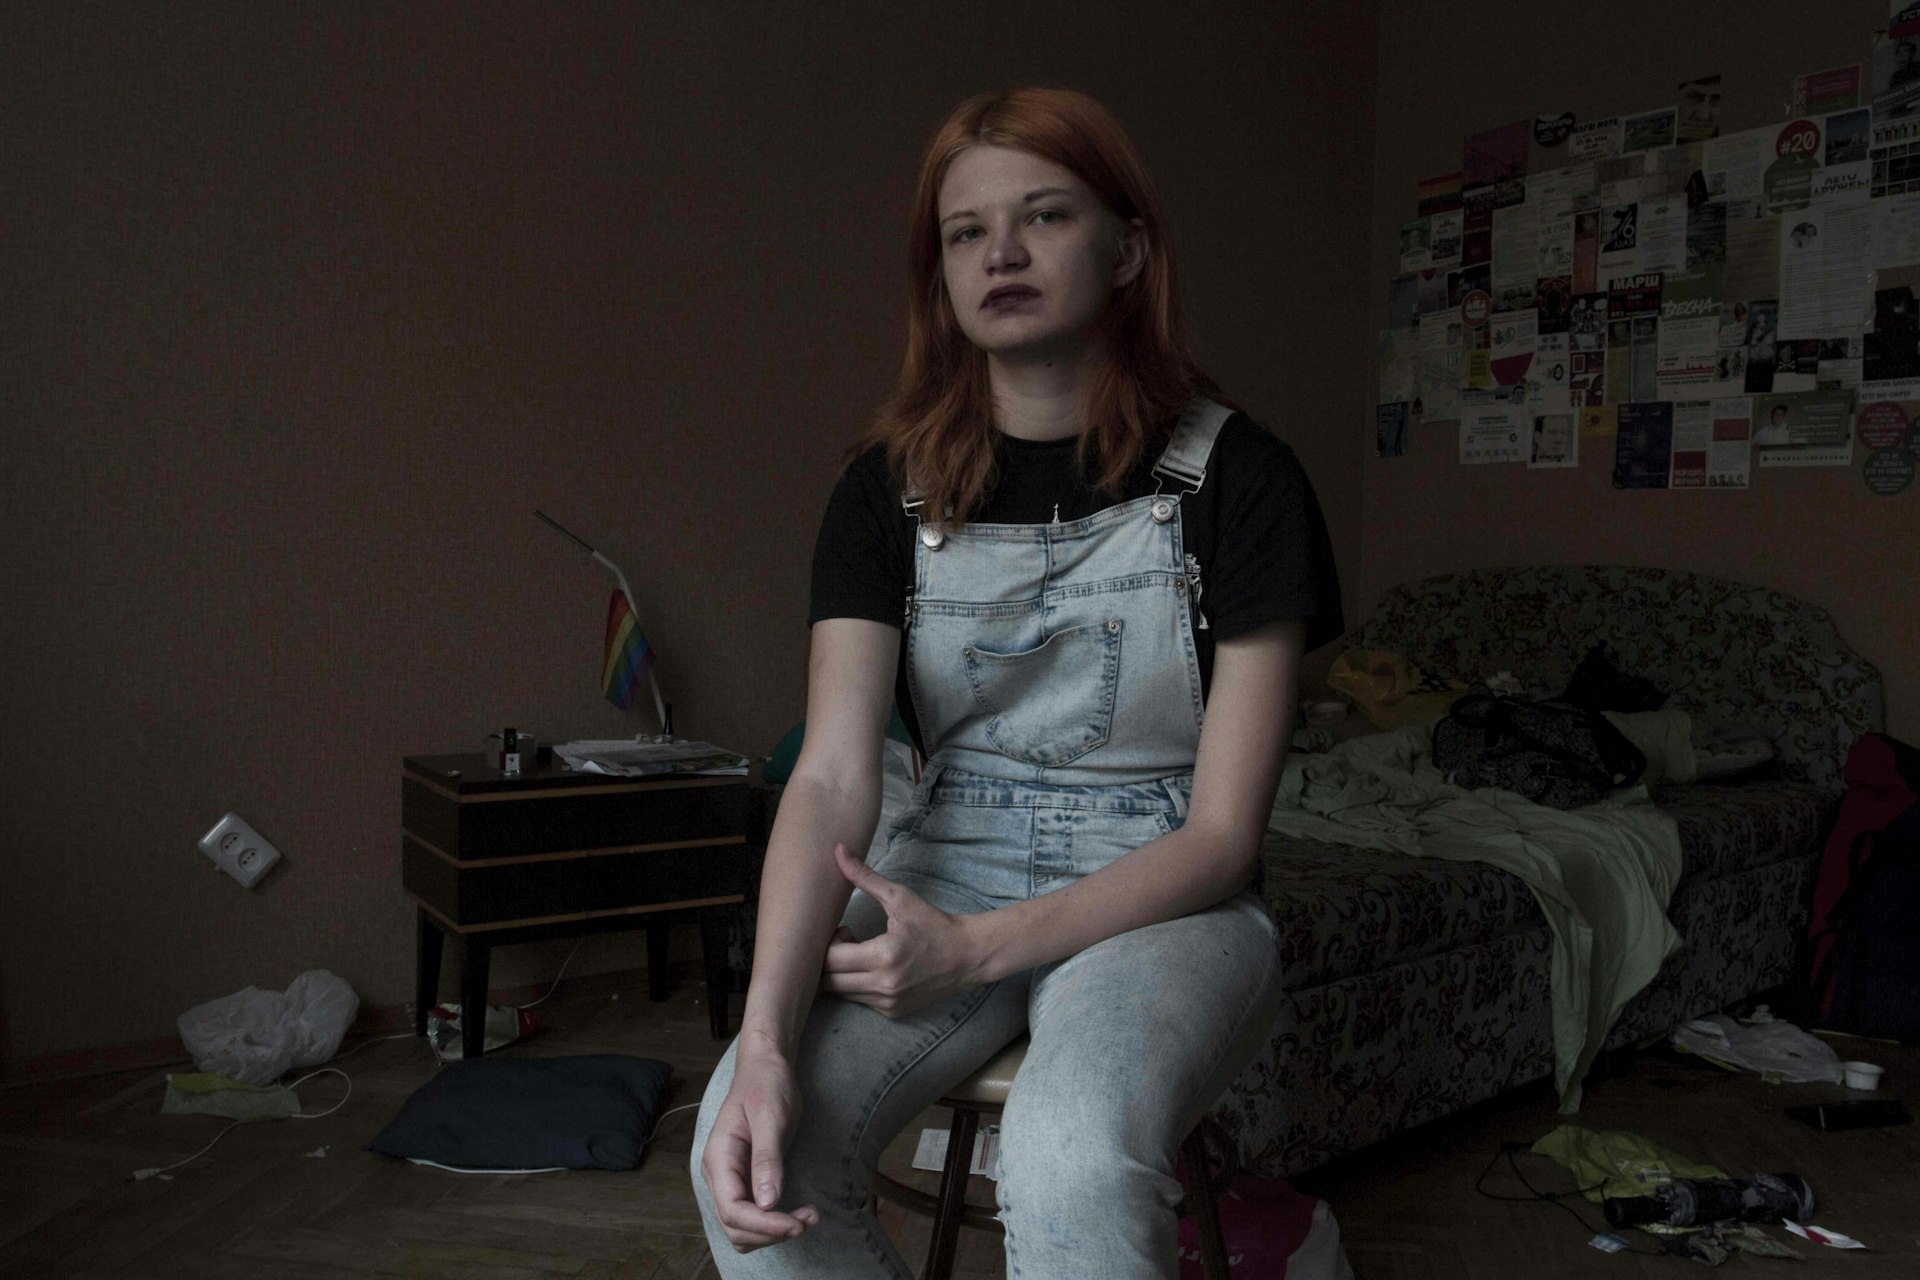 Intimate portraits of Russia’s new wave of activists